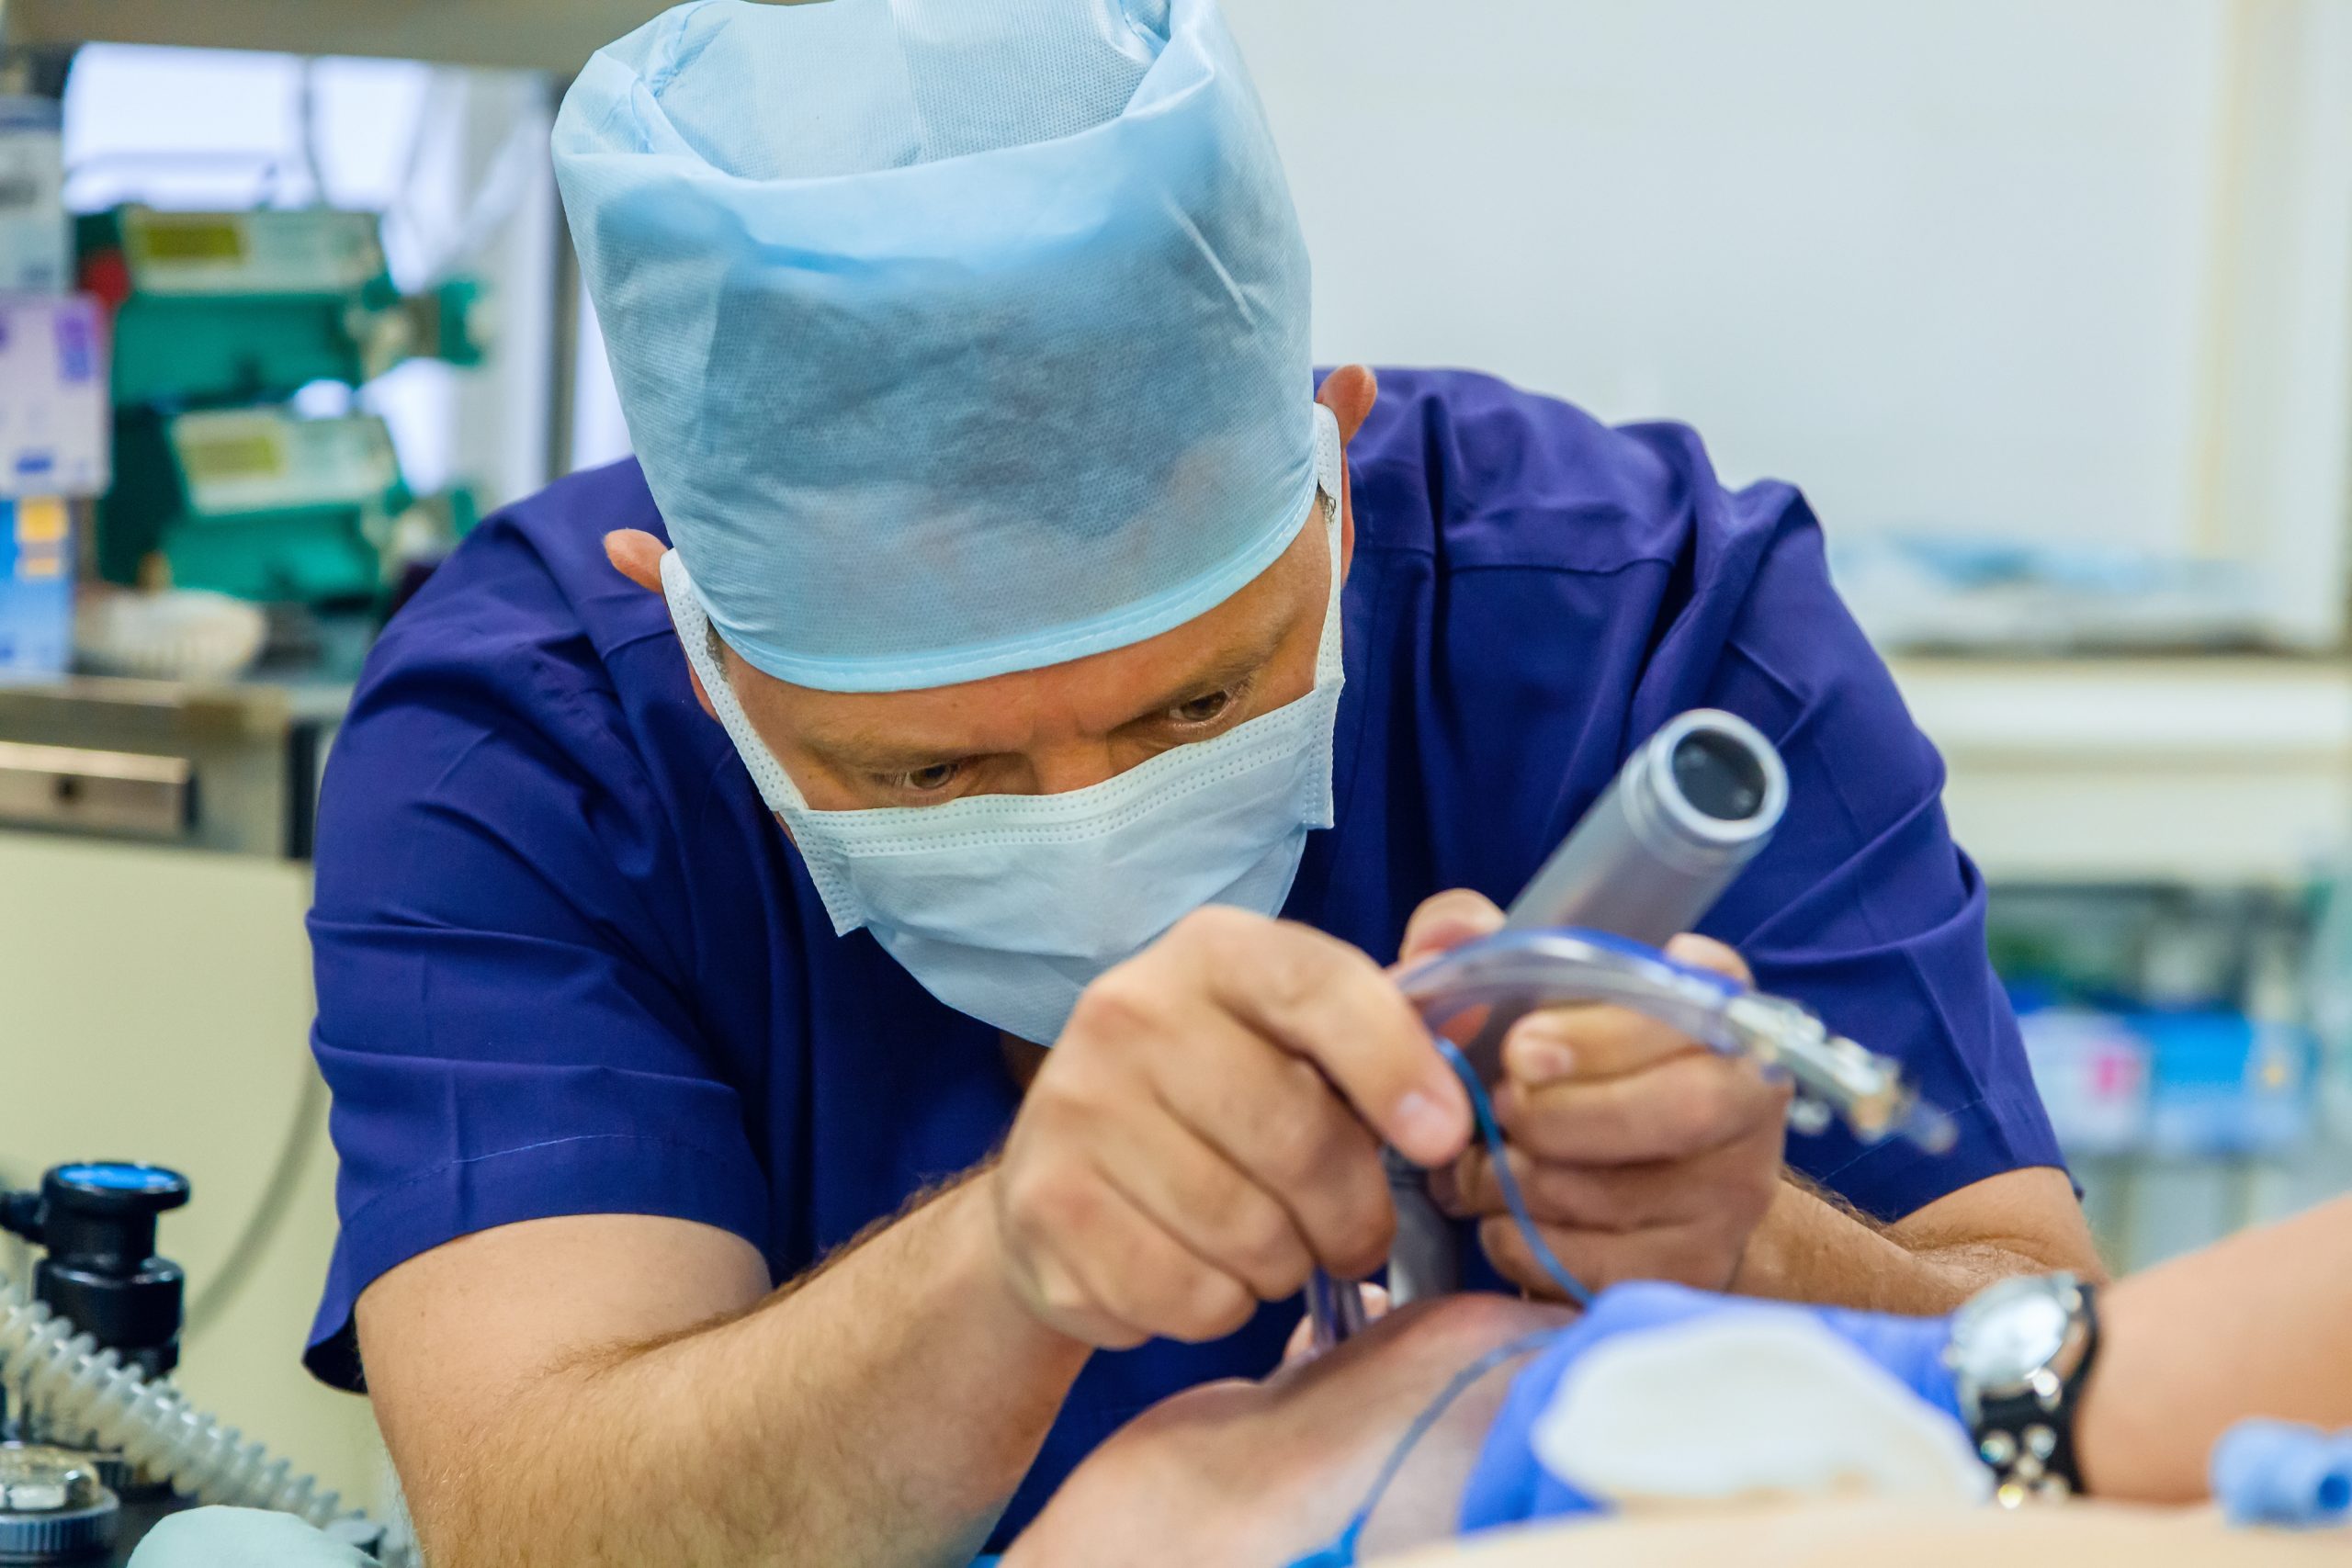 Anesthesiologist performs tracheal intubation for patient in operation room